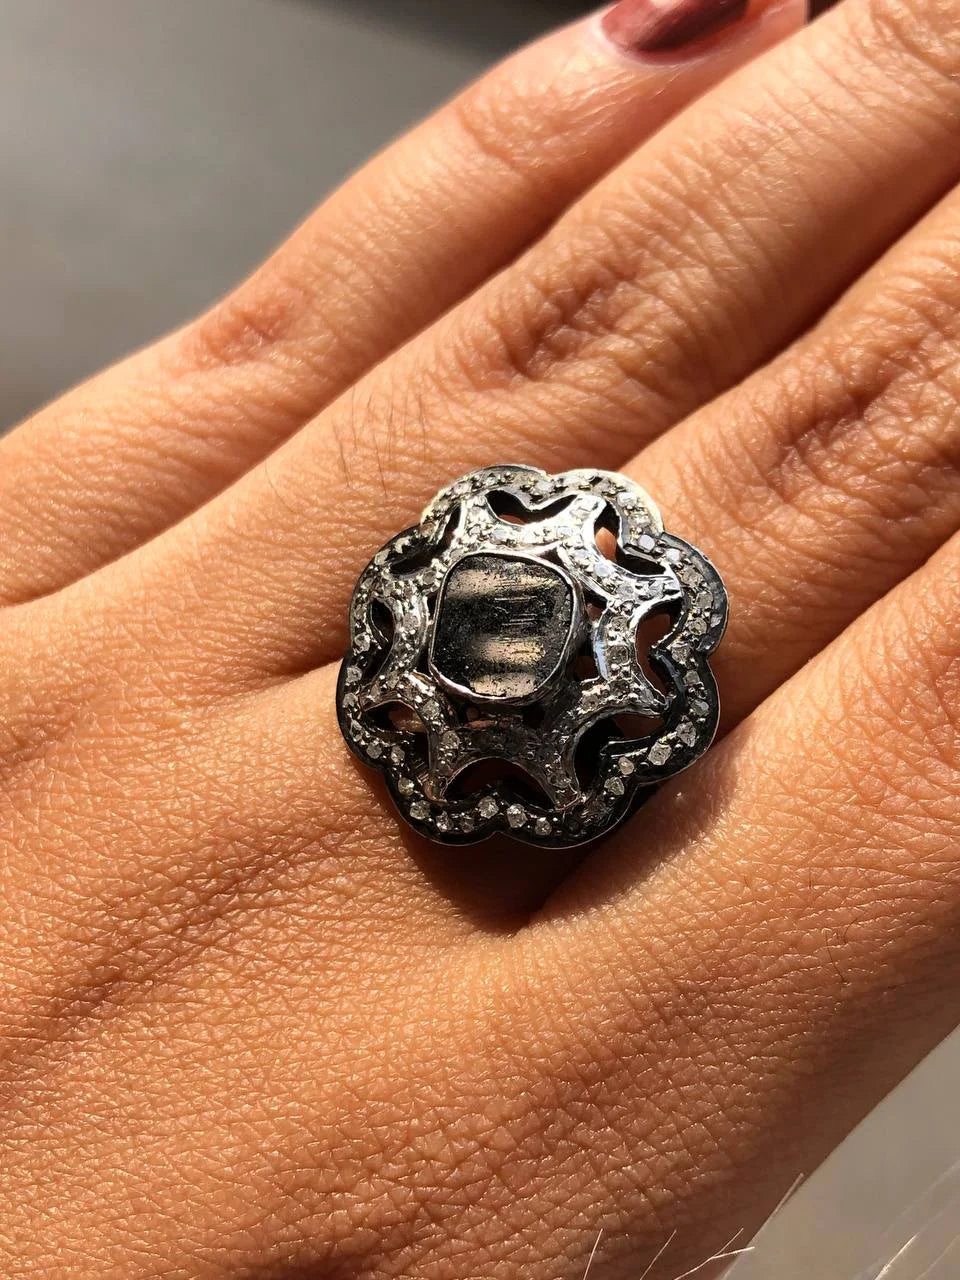 Vintage Style Floral Ring: Natural Black Diamond, 925 Sterling Silver - Unique Beauty